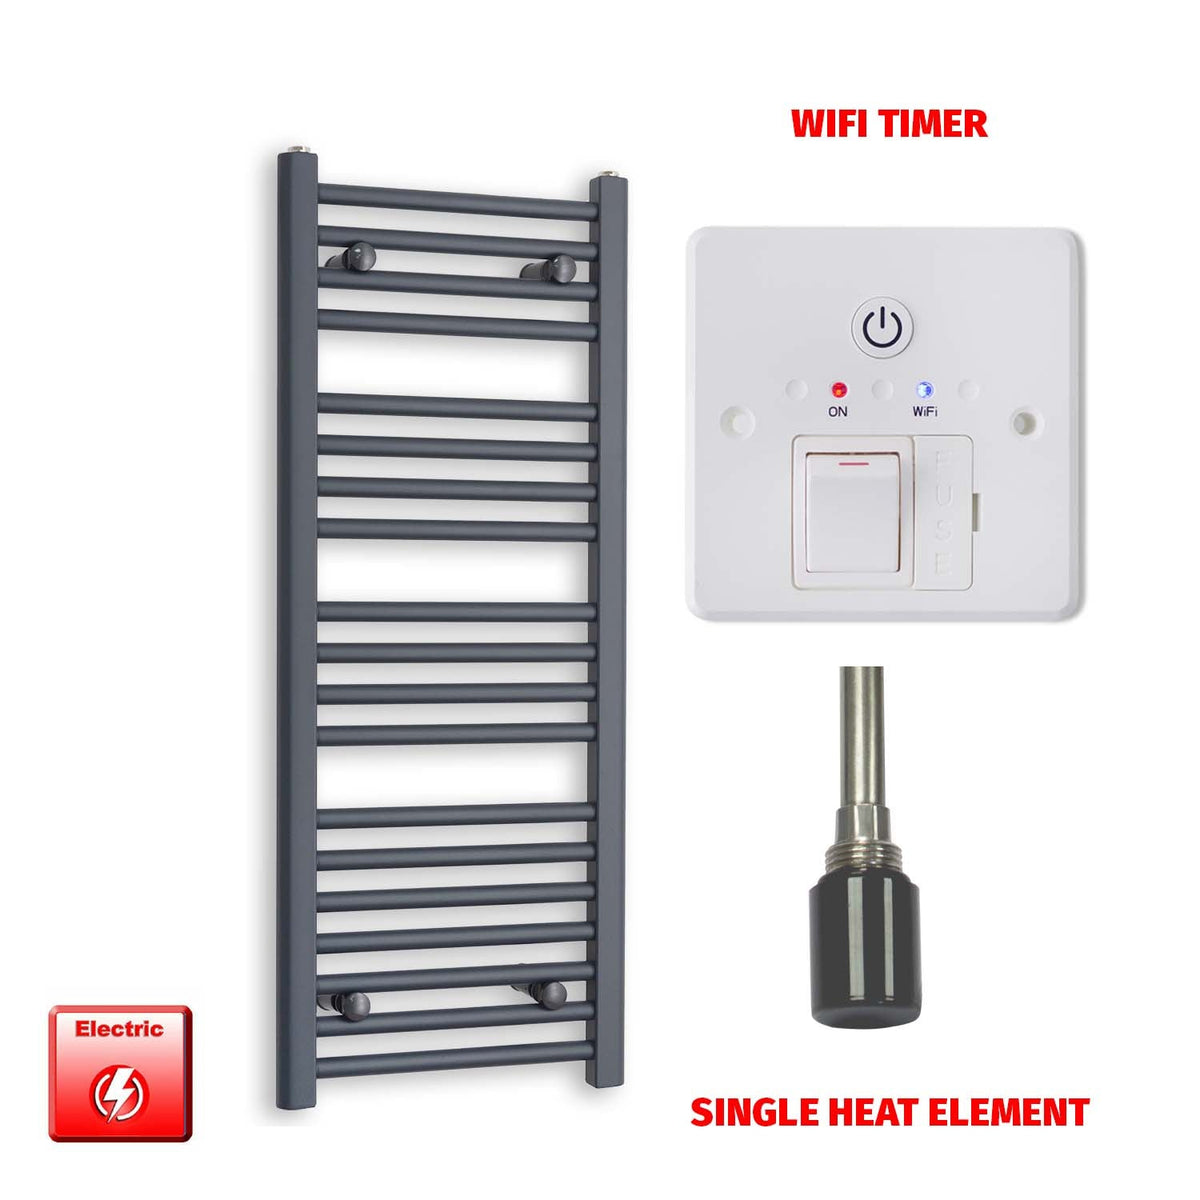 1000 x 400 Flat Anthracite Pre-Filled Electric Heated Towel Radiator HTR Single heat element Wifi timer